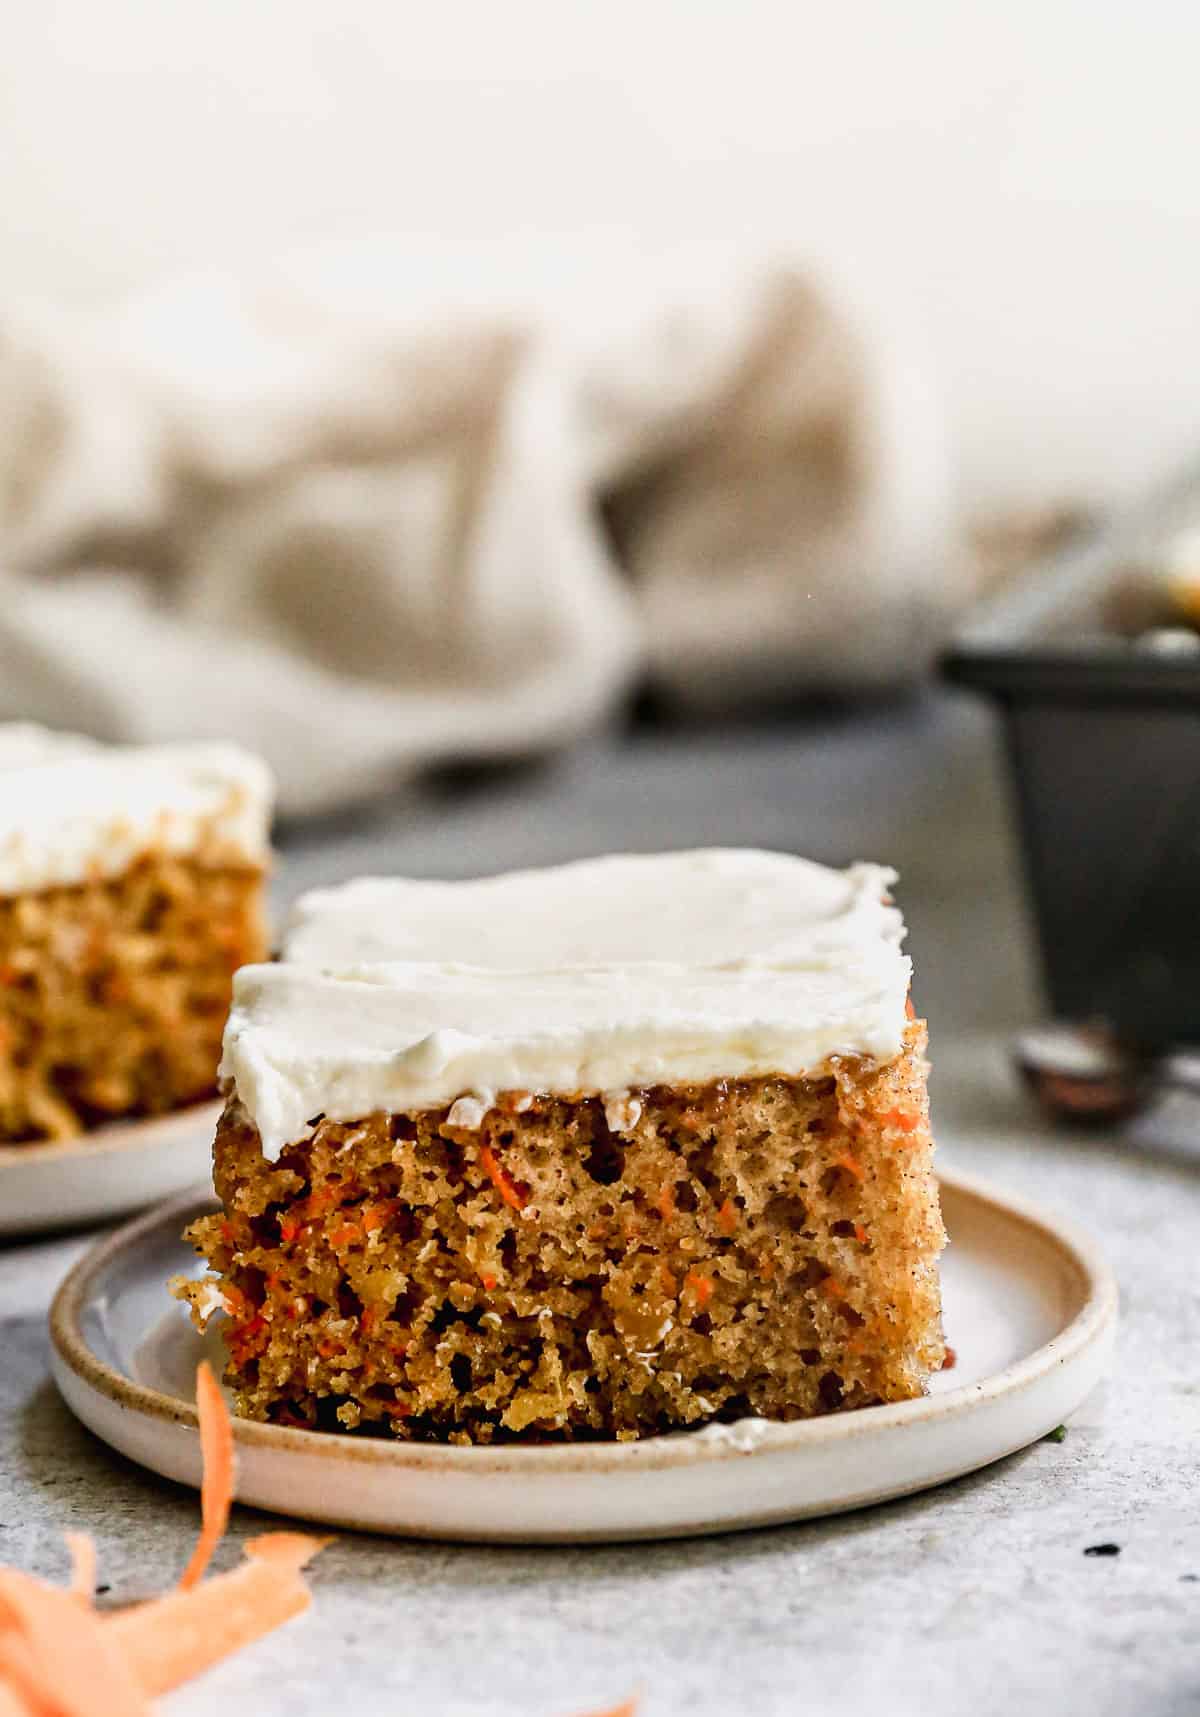 A piece of Easy Carrot Cake with whipped cream cheese frosting on a serving plate, ready to enjoy.